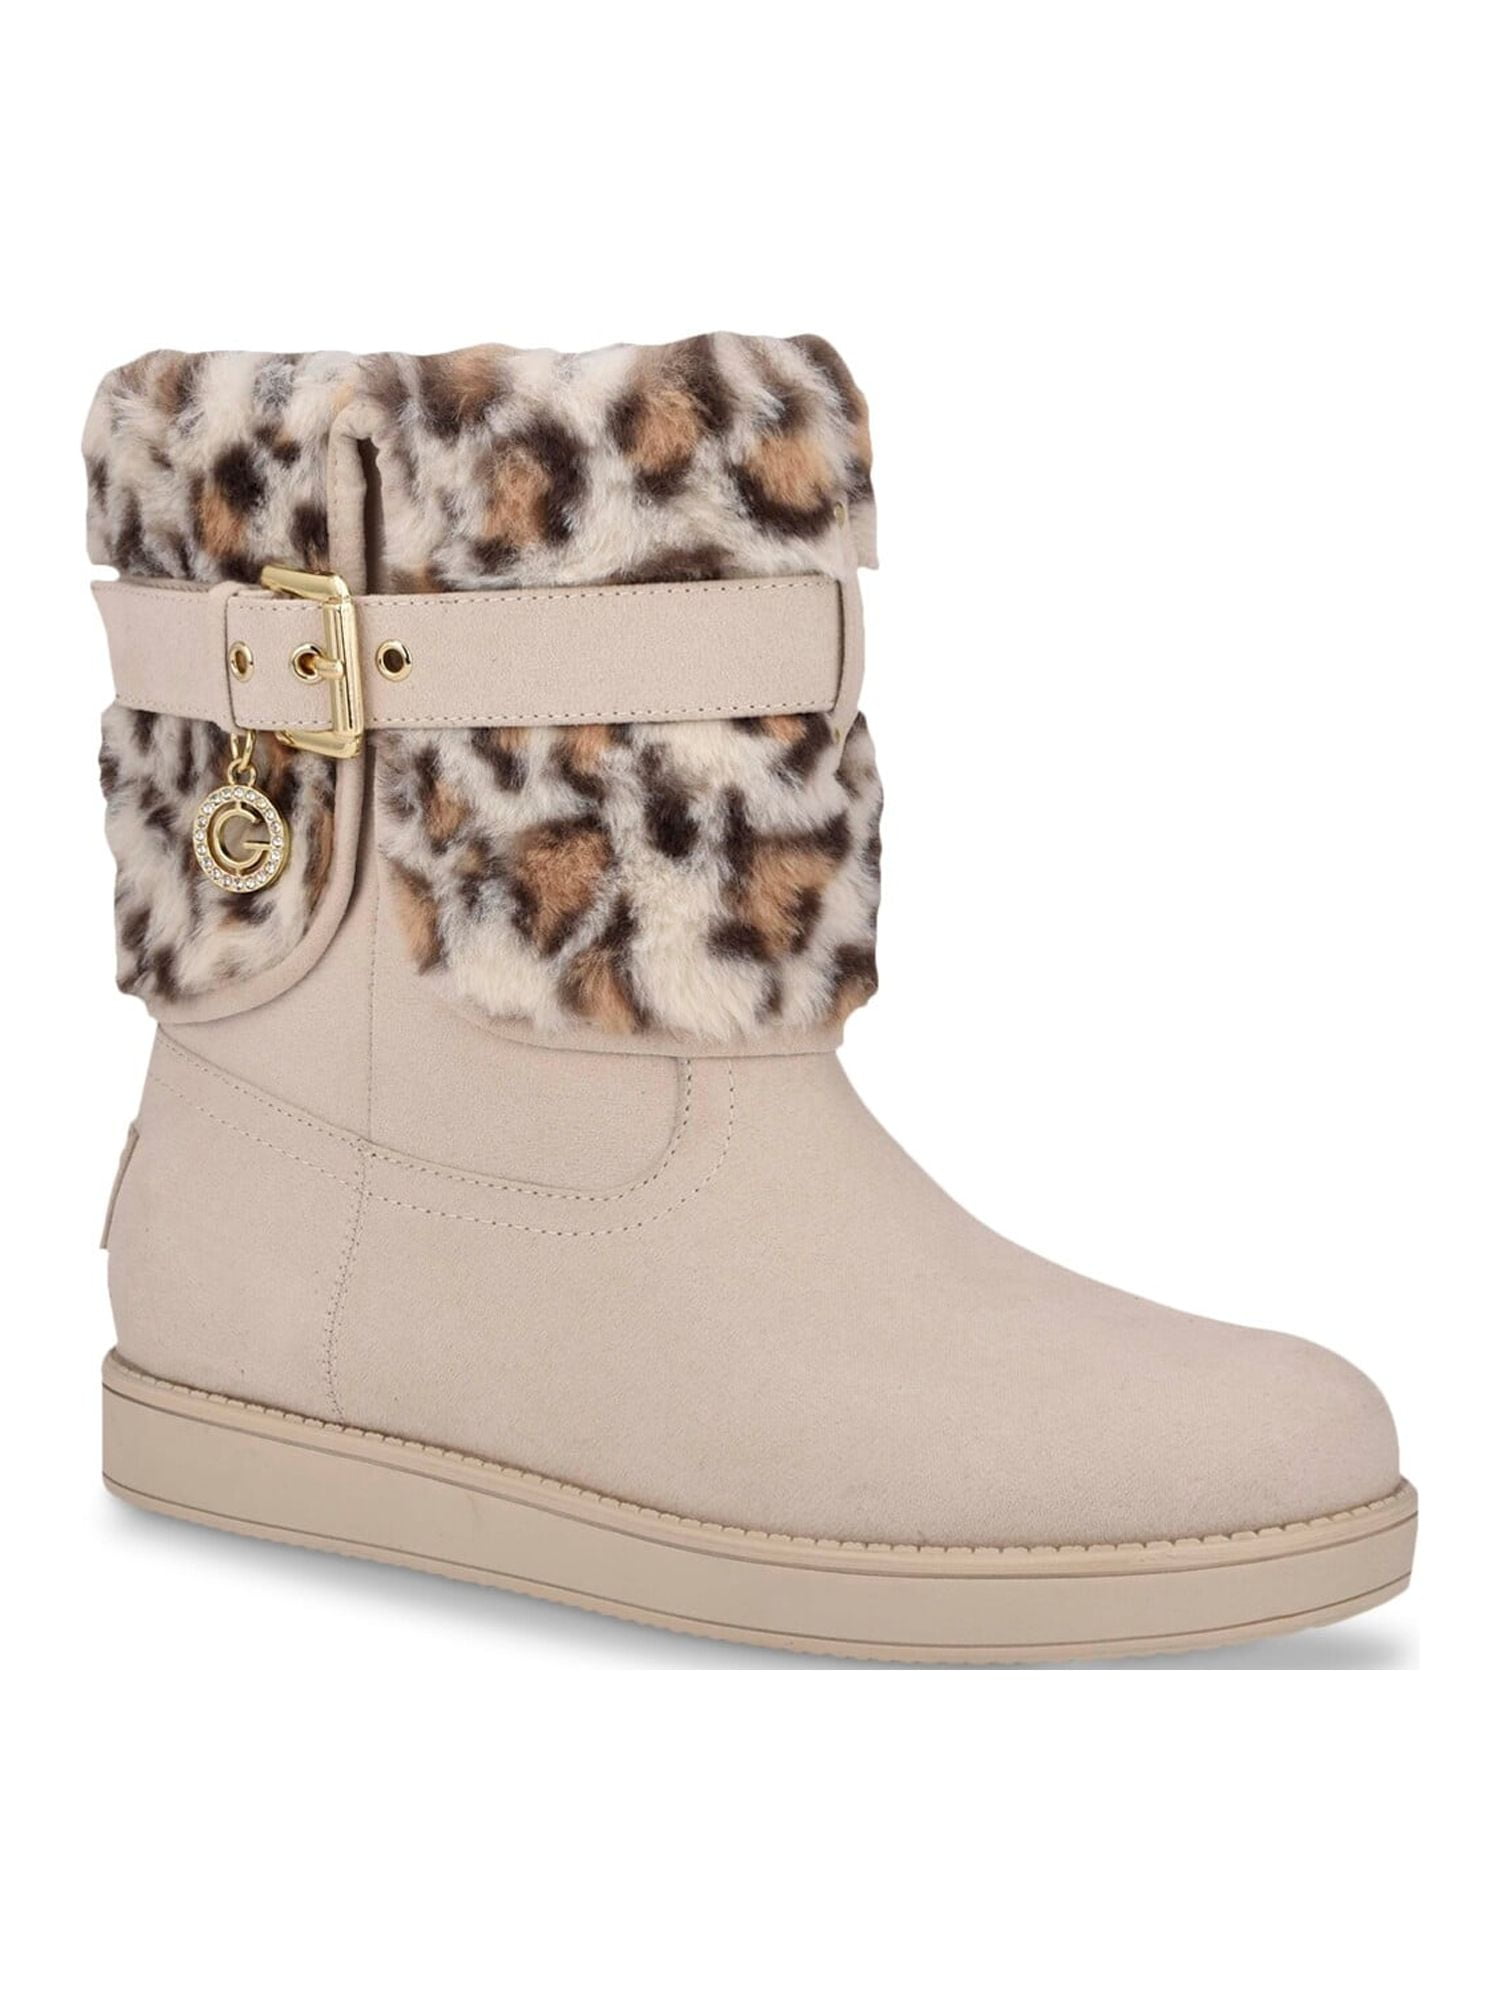 GBG LOS ANGELES Womens Beige Animal Print Buckle Accent Cushioned Adlea  Round Toe Snow Boots 5.5